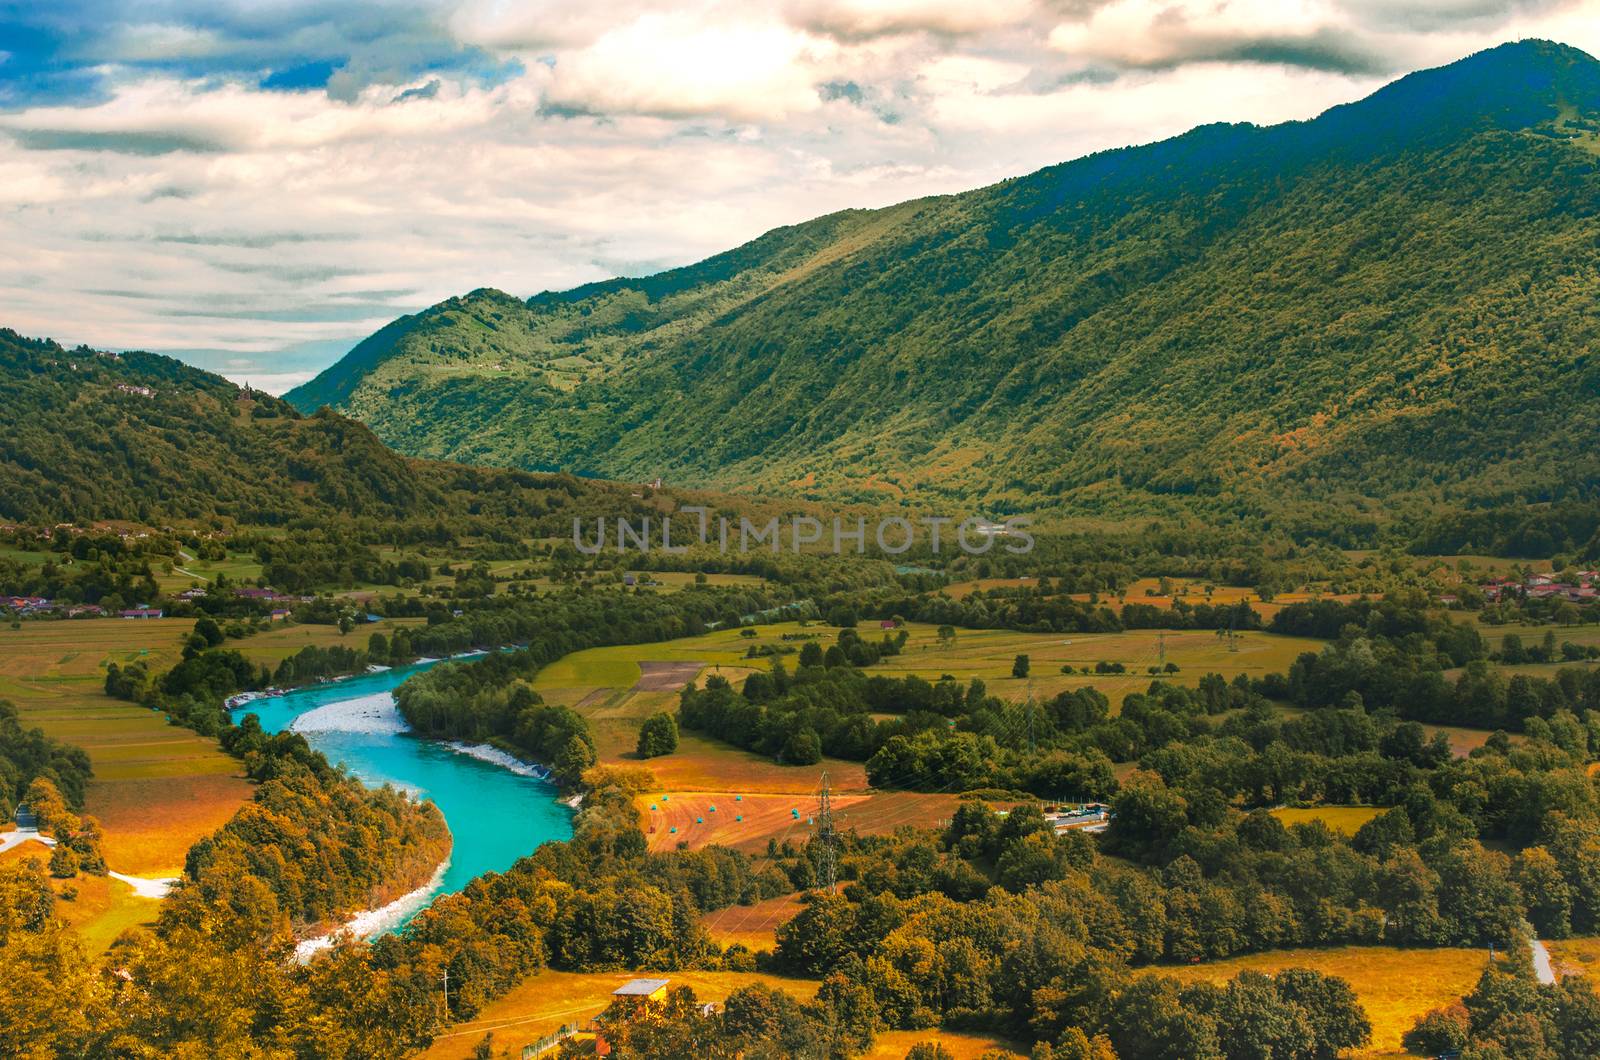 Isonzo Soca river valley  yellow teal and orange sunset landscape in  Slovenia - Italy border .